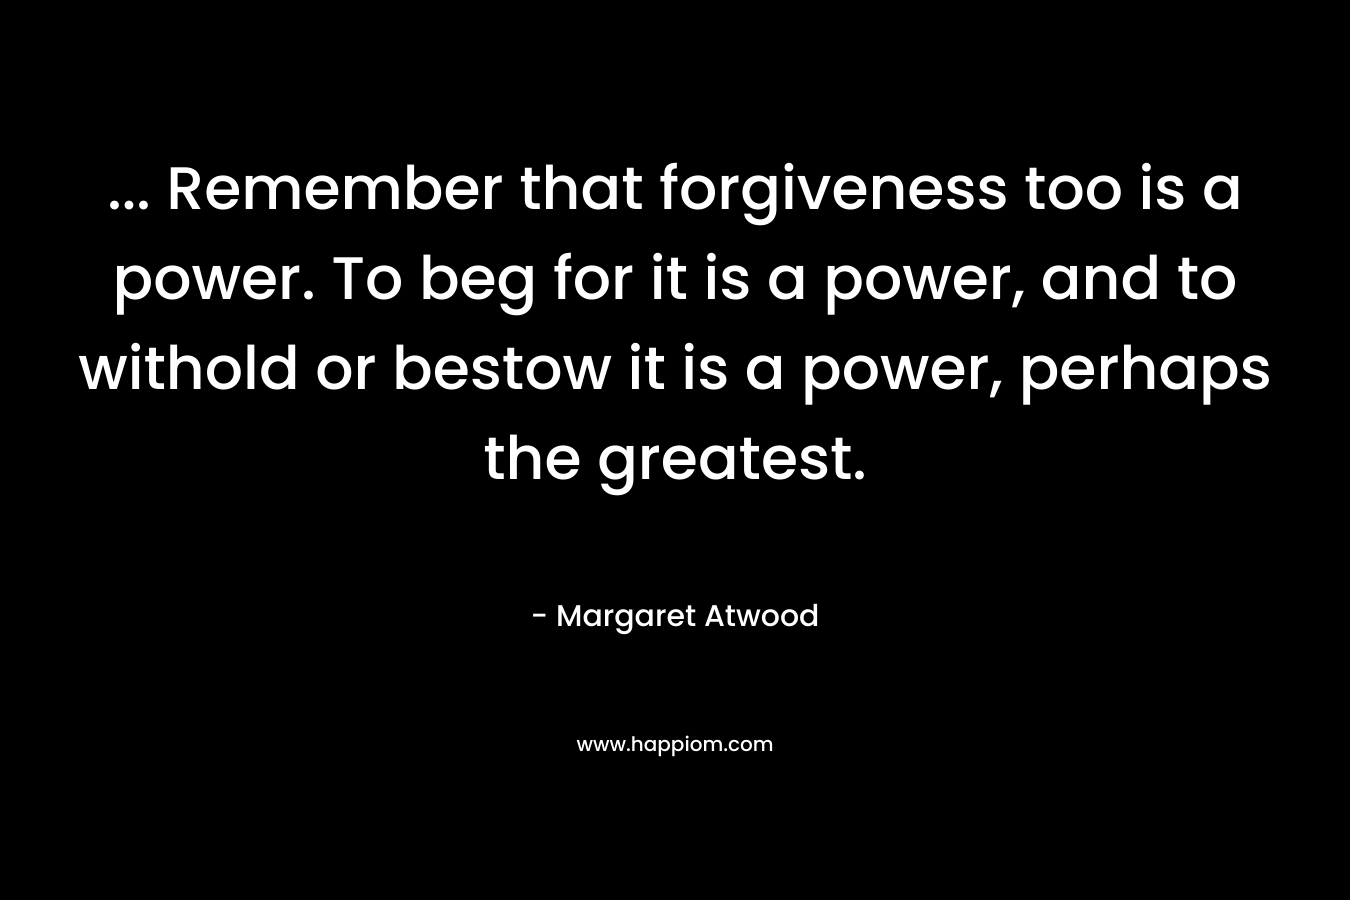 ... Remember that forgiveness too is a power. To beg for it is a power, and to withold or bestow it is a power, perhaps the greatest.